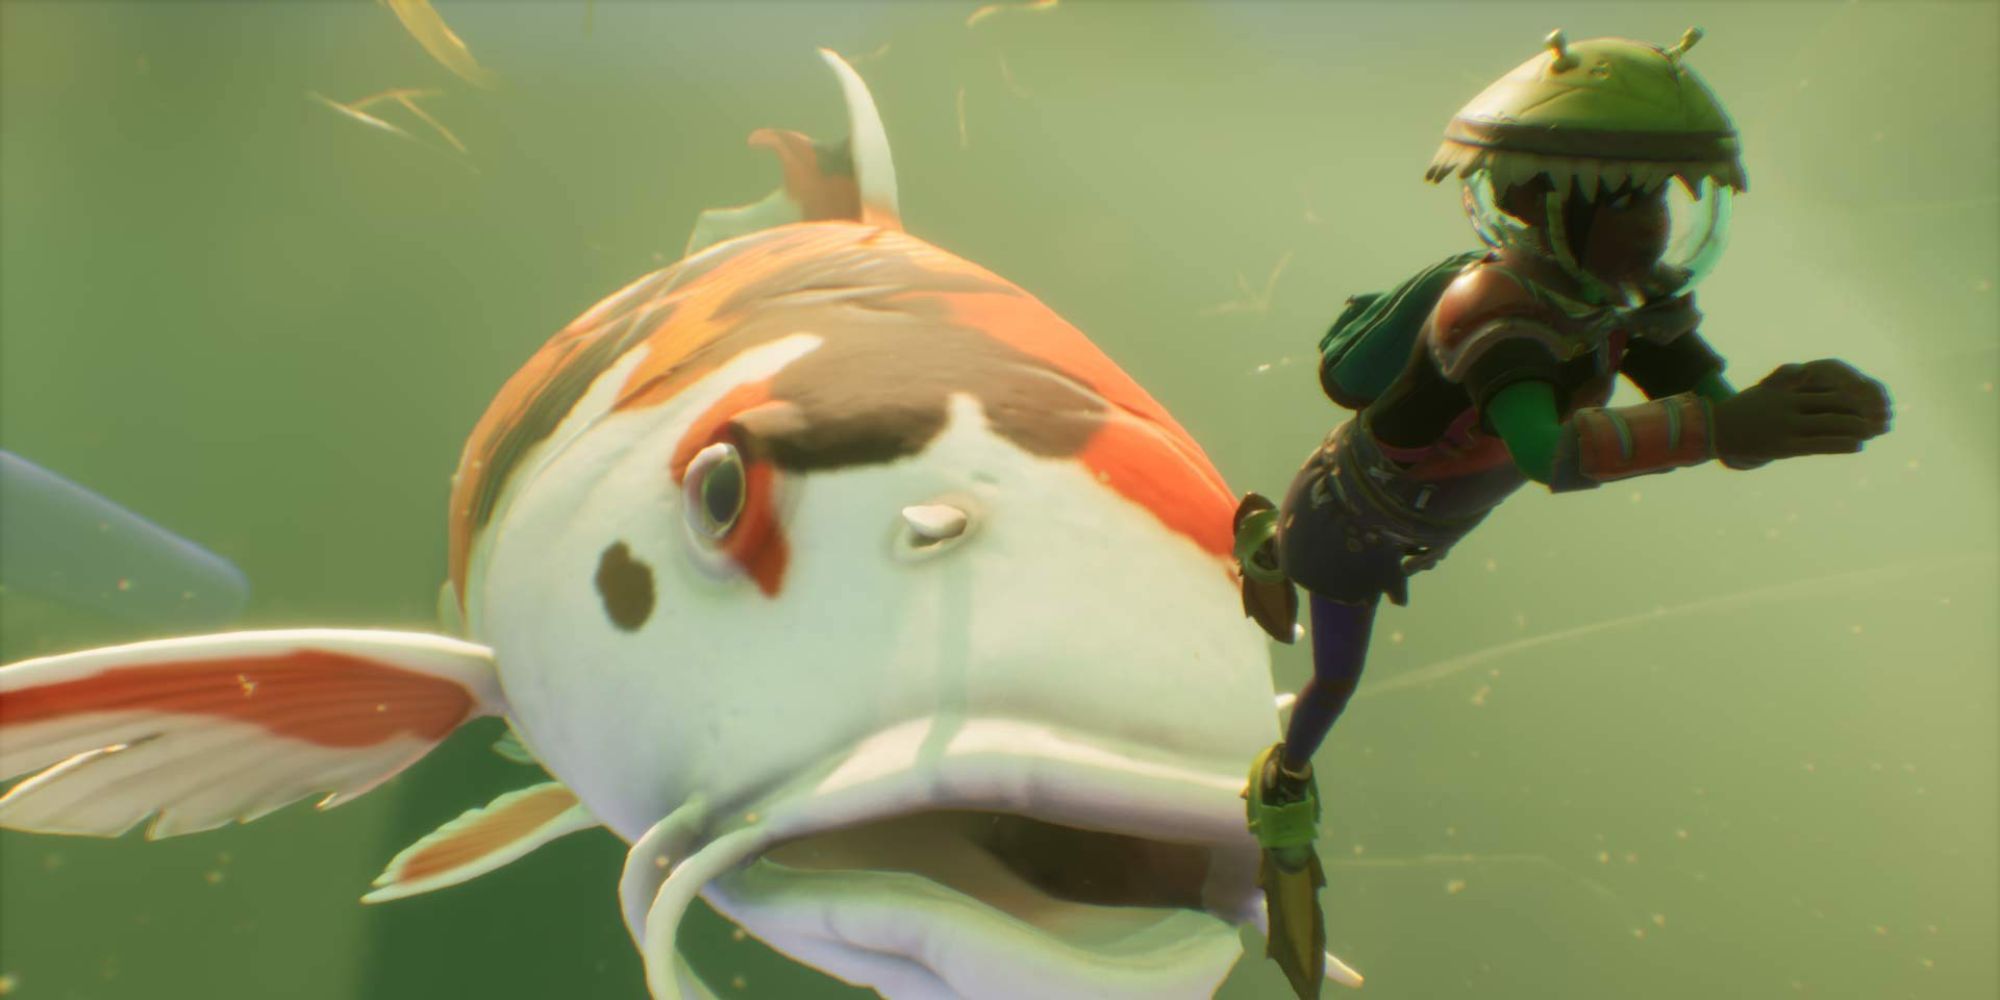 Max being chased underwater by a Koi Fish in Grounded.